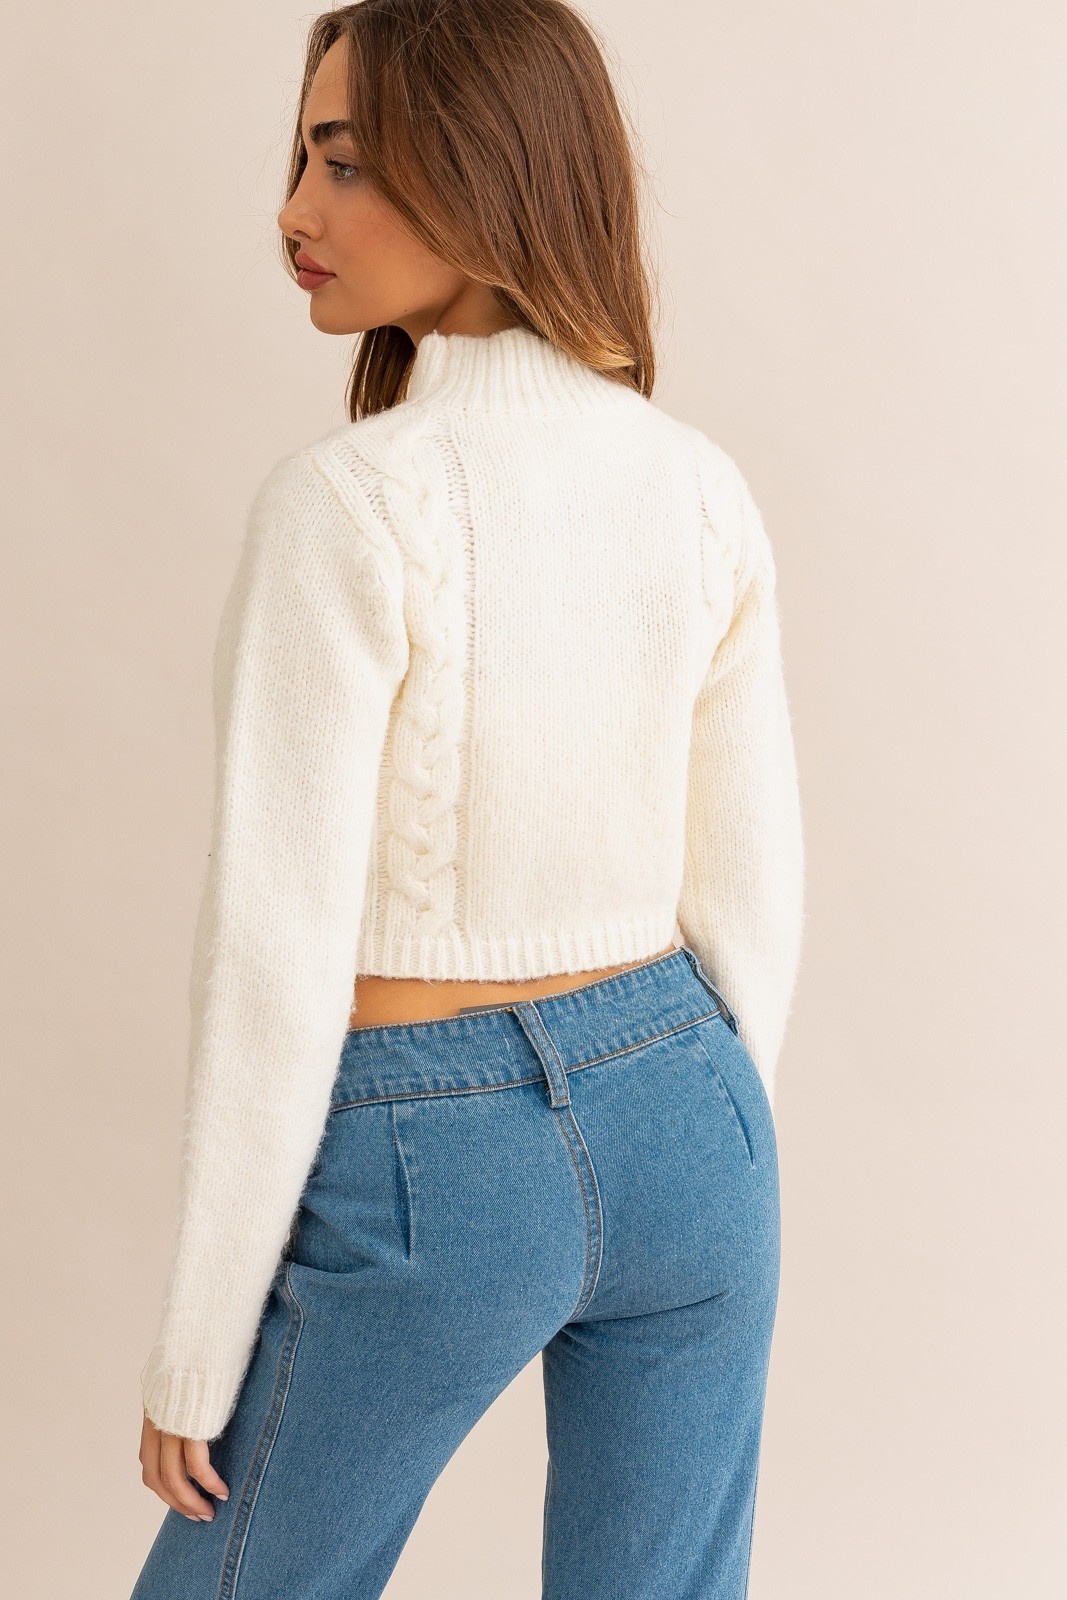 Falling For You Crop Sweater